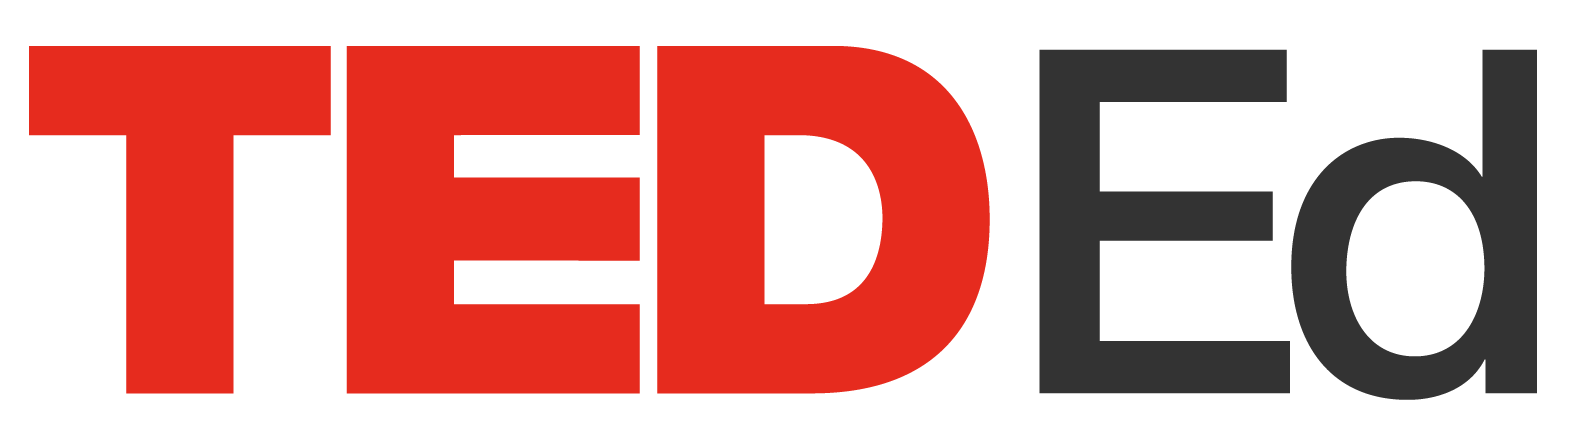 education ted